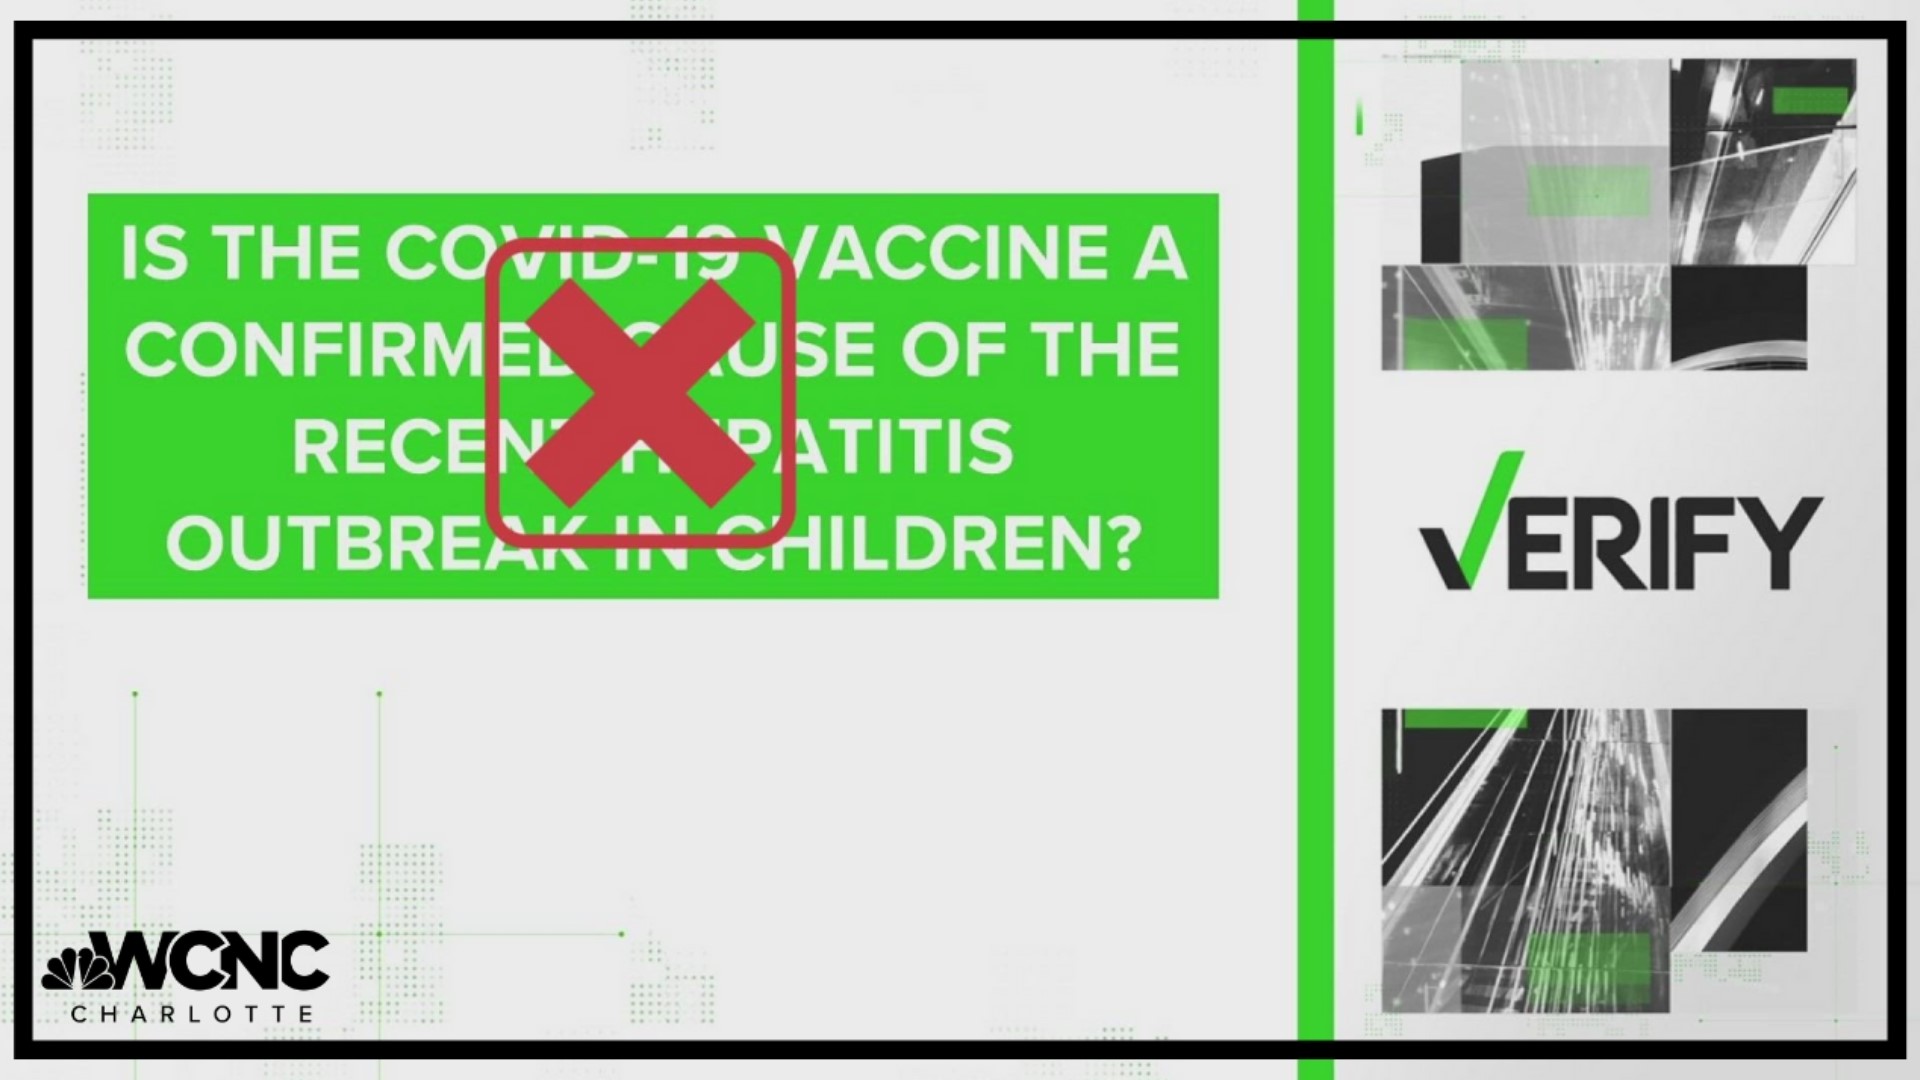 No, the COVID vaccine is not the confirmed cause of the hepatitis outbreak in kids.